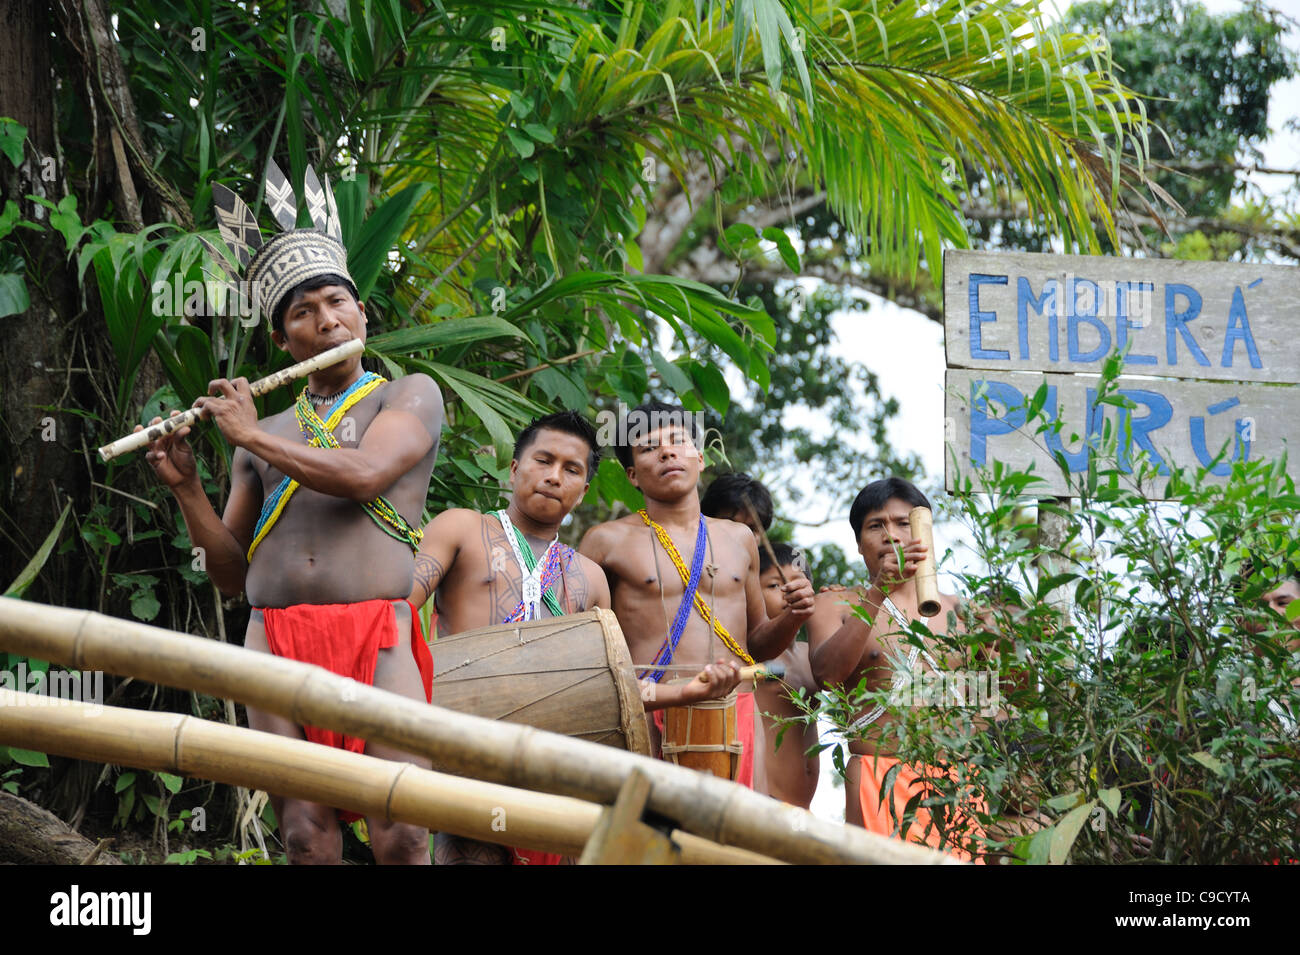 Embera indian men playing the flute and drumming welcoming tourists at Emberá Purú indigenous community in Panama Stock Photo